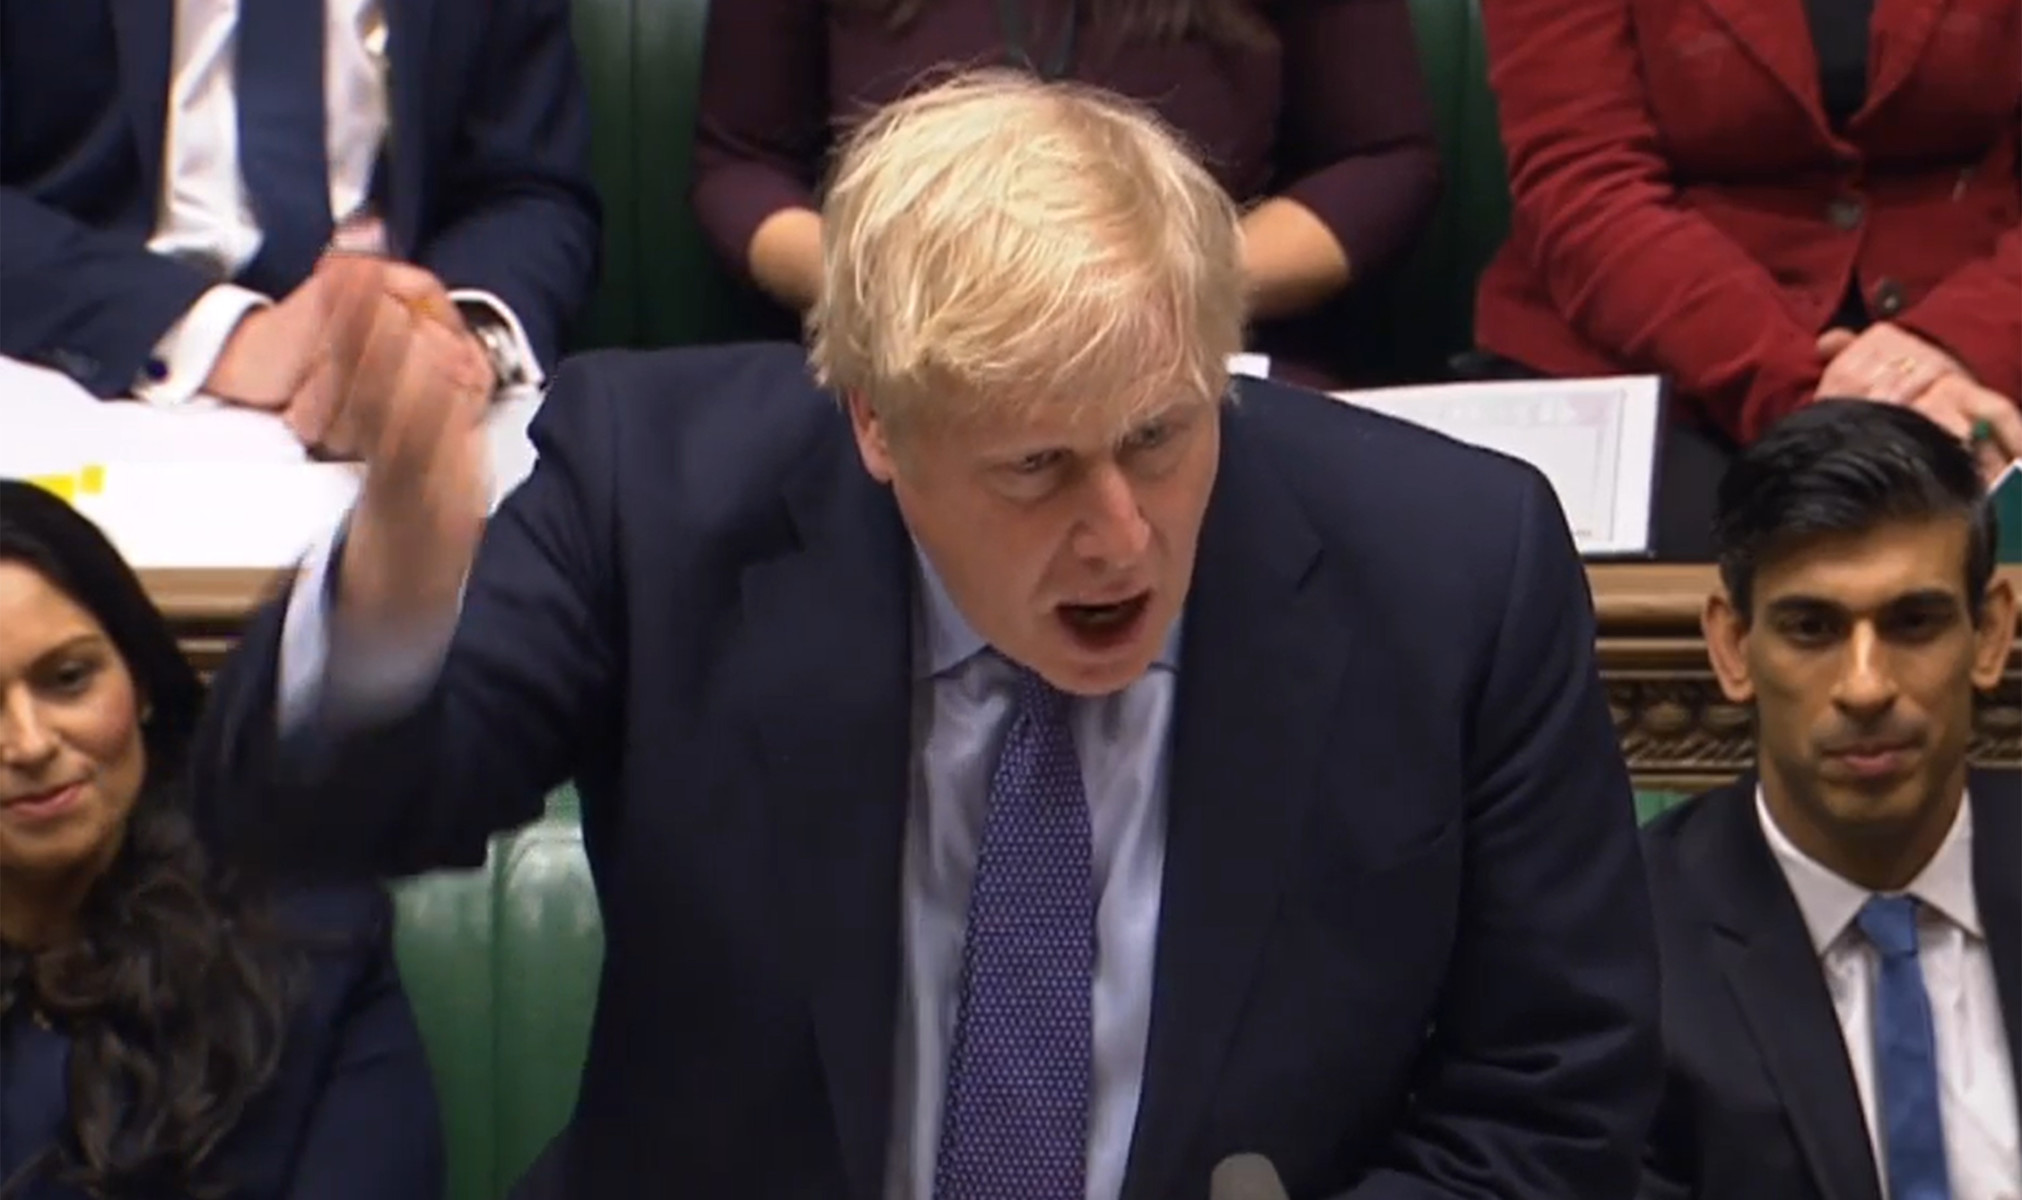 Boris Johnsons plan is to push for similar agreements which safeguard civil liberties better